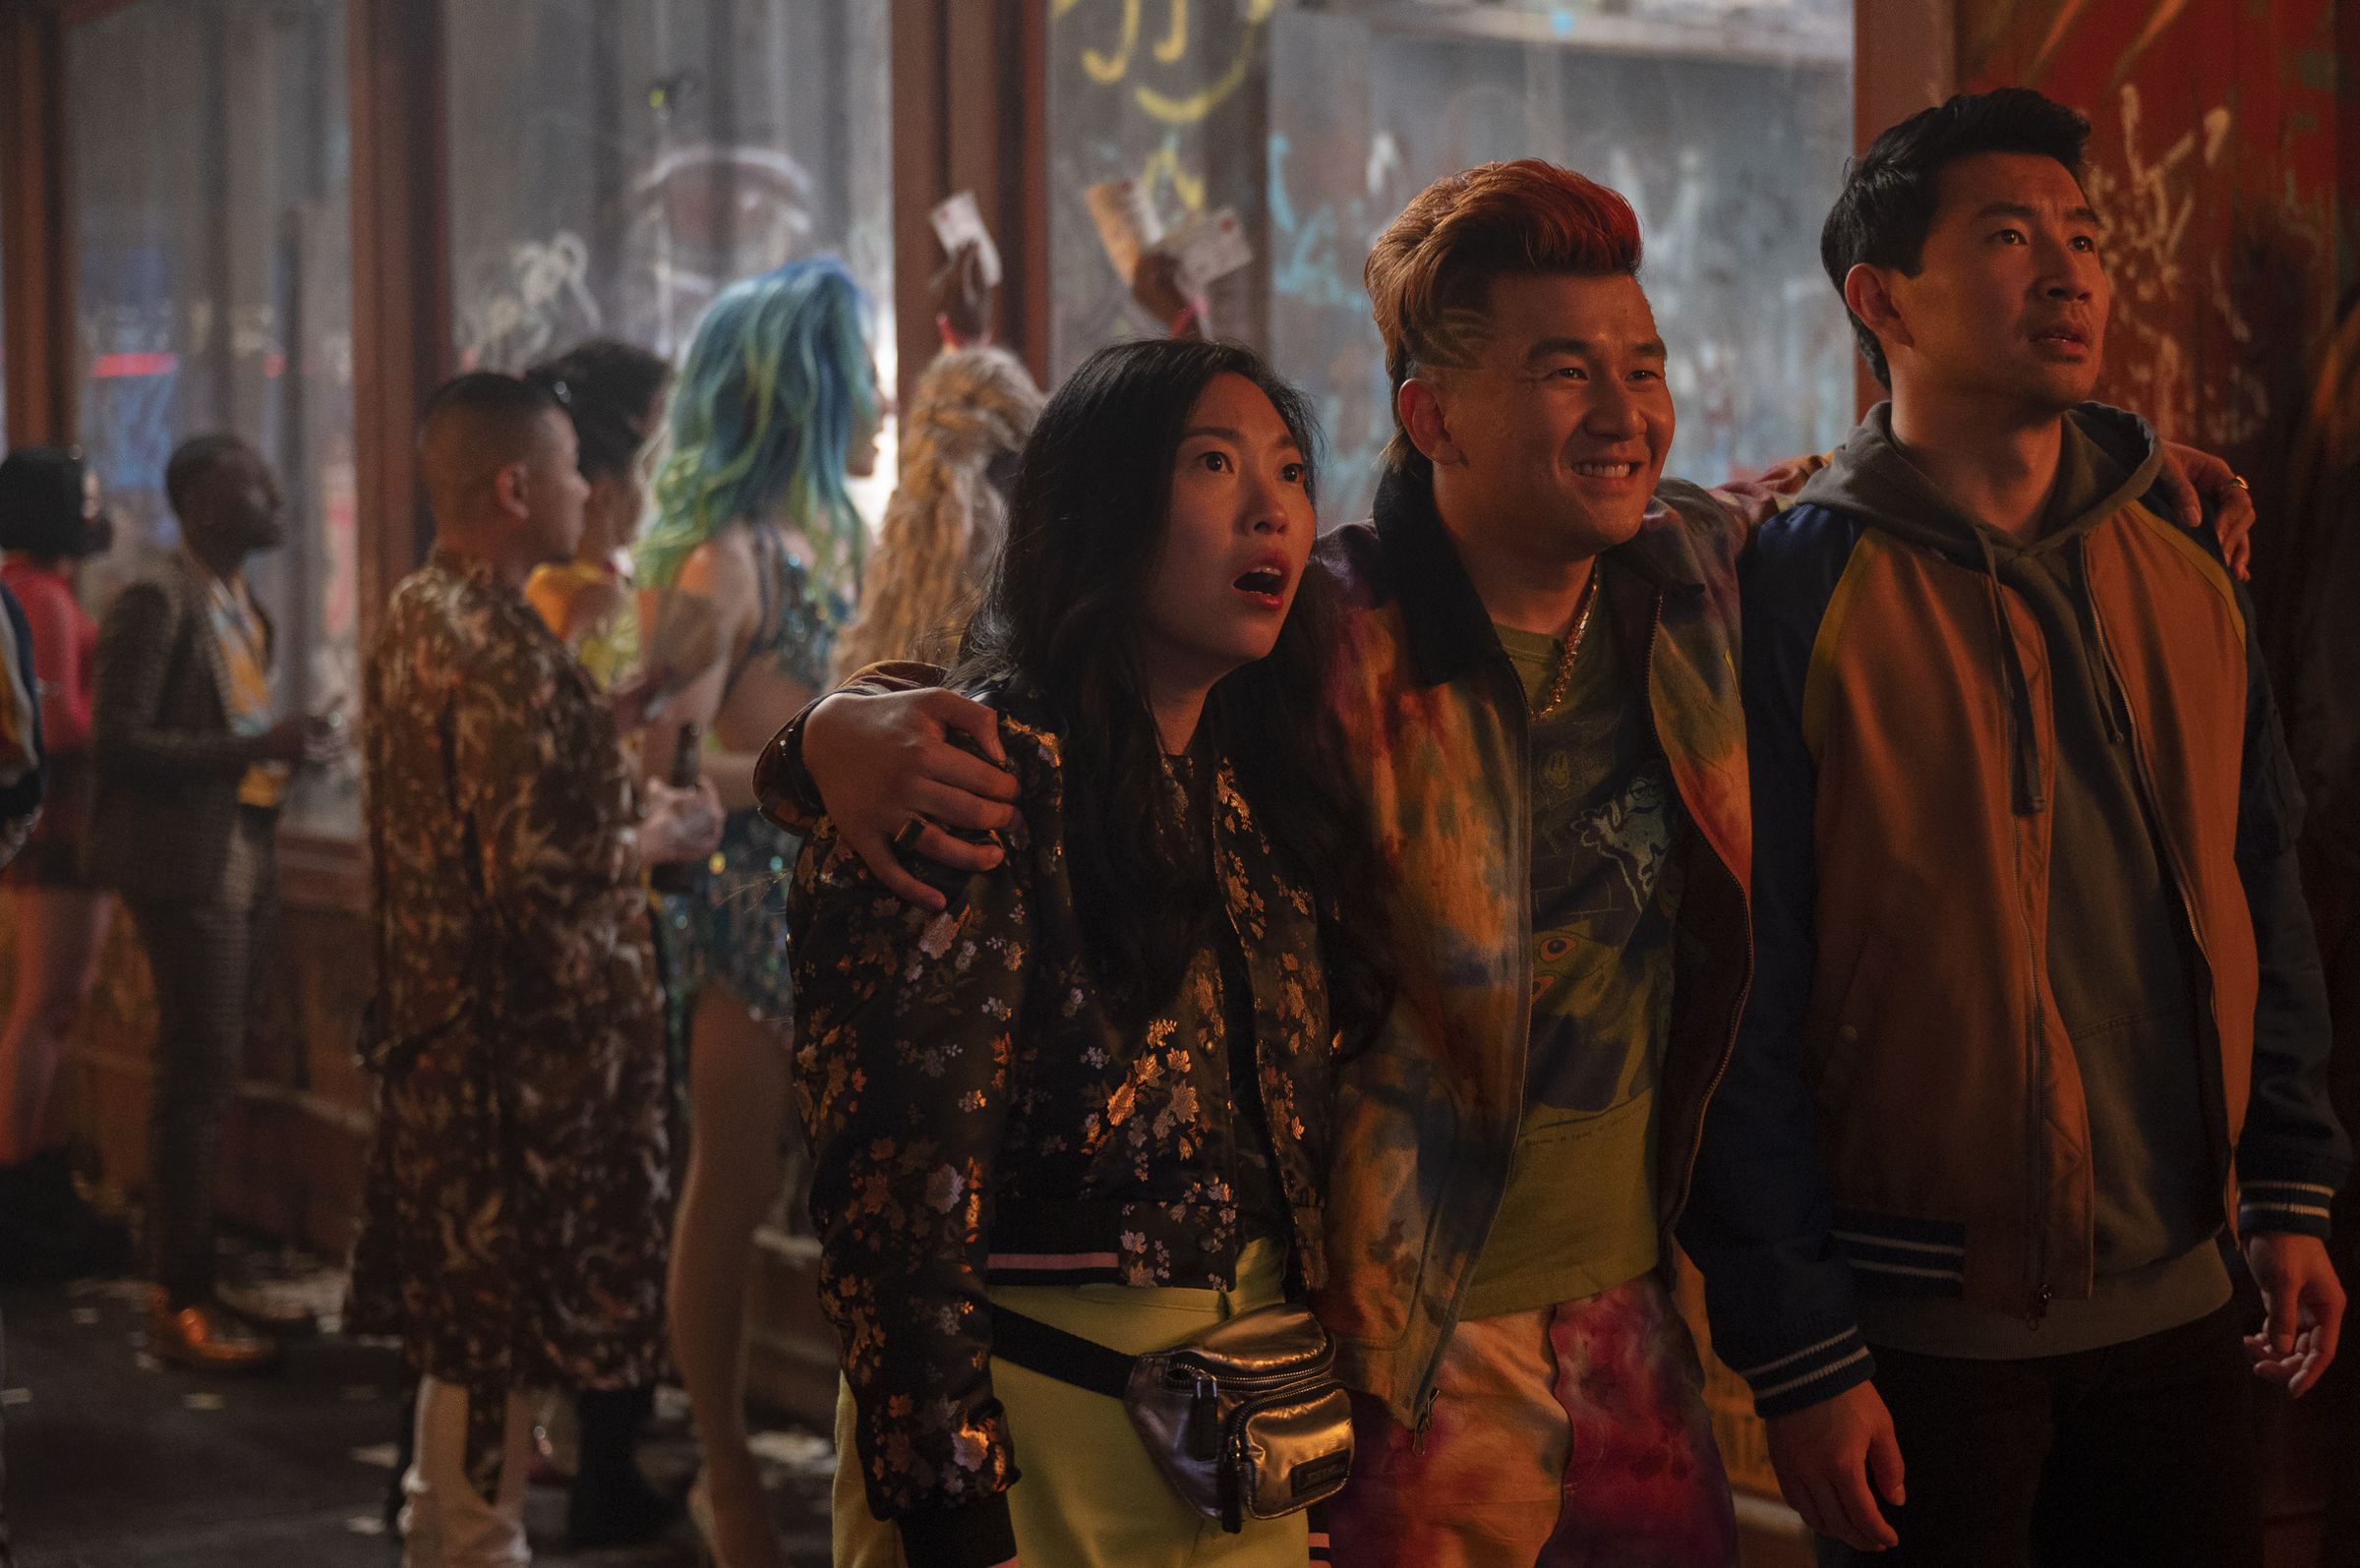 Awkwafina as Katy, and Simu Liu as Shang, stare in open mouthed shock at something out of frame as Ronny Chieng as Jon Jon embraces them both while looking amused.